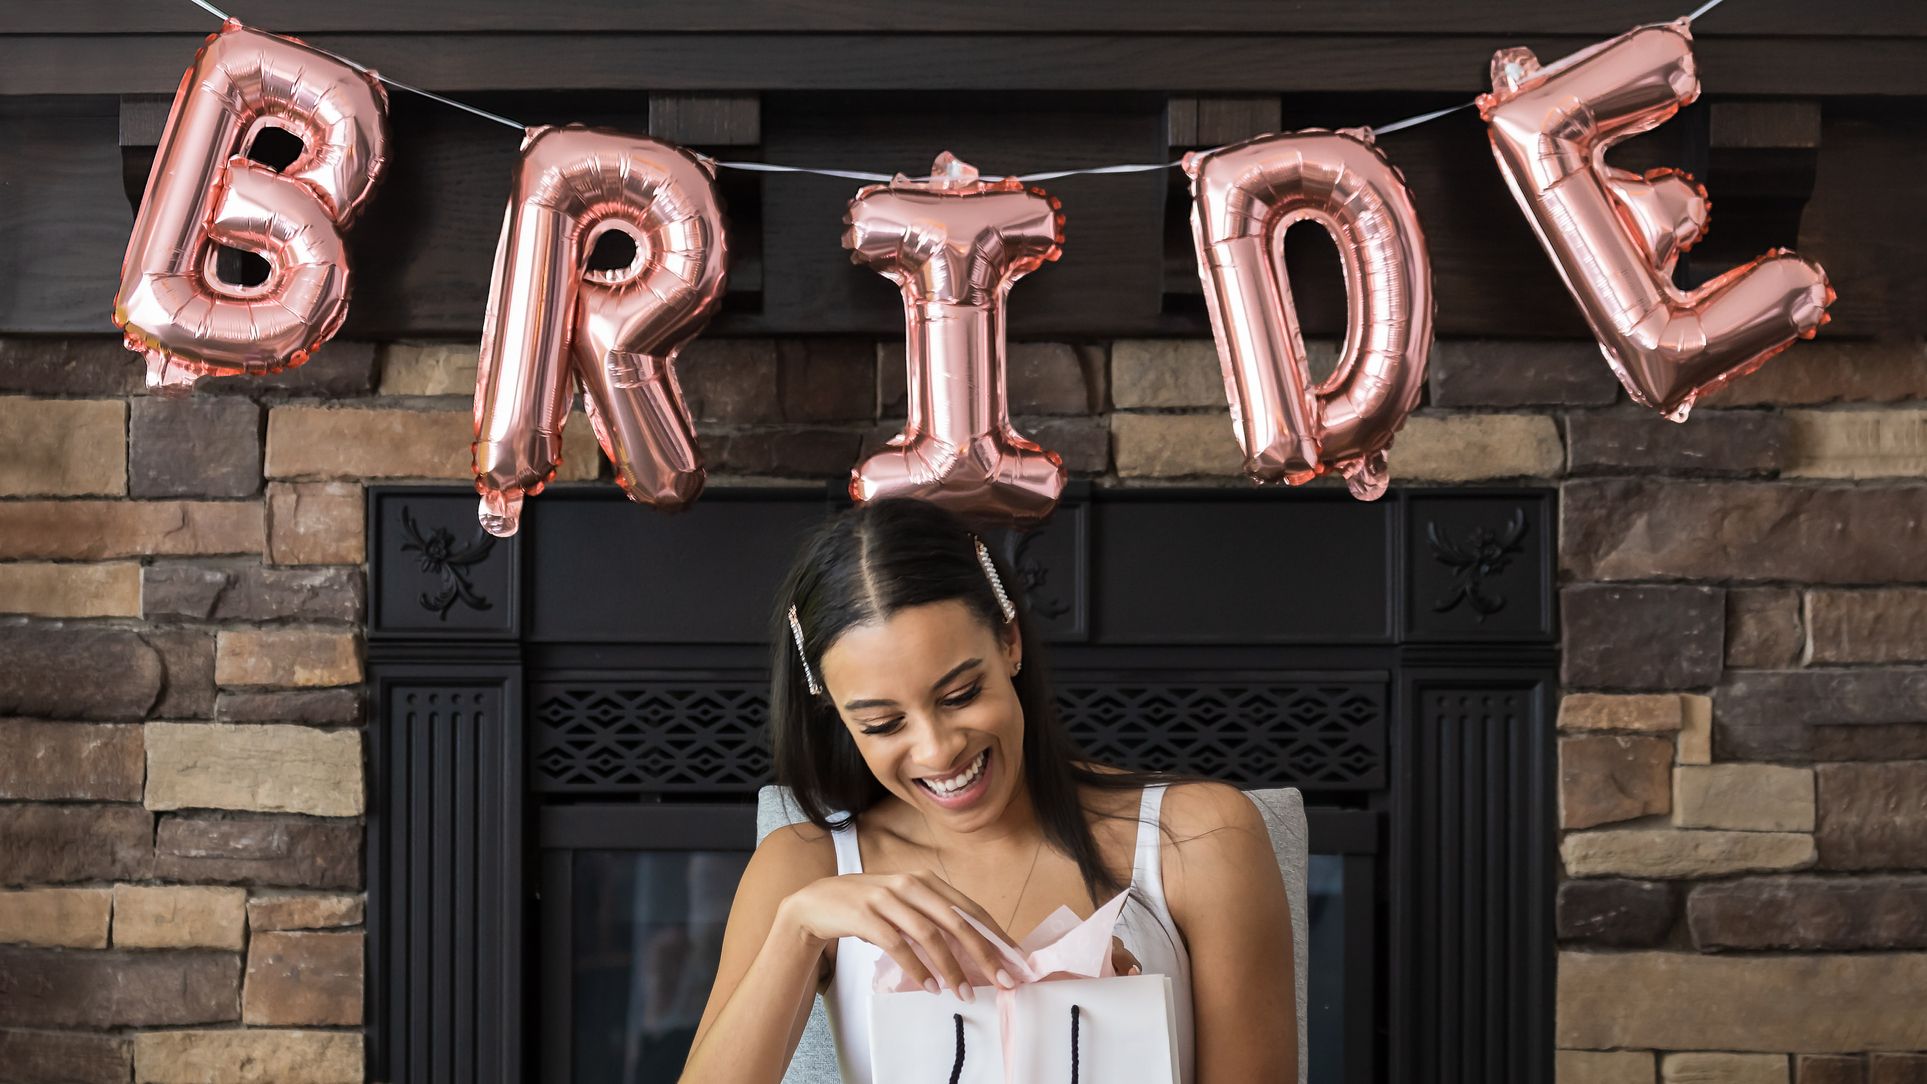 Should You Bring a Gift to the Bachelorette Party?